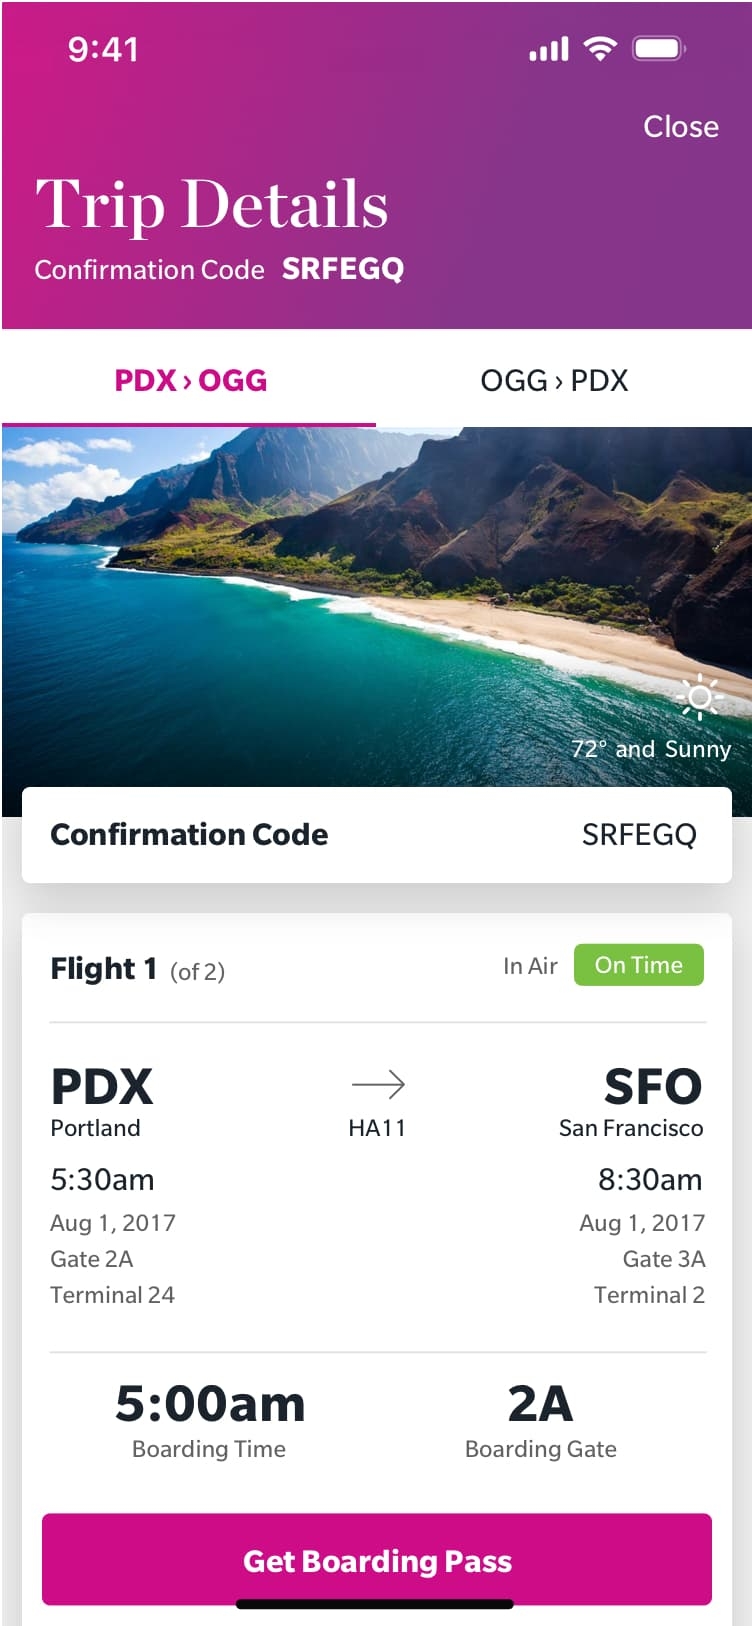 Hawaiian Airlines app showing flight details for a trip from PDX to SFO, including flight number, times, seat assignment, and a photo of a coastline under text "Trip Details.